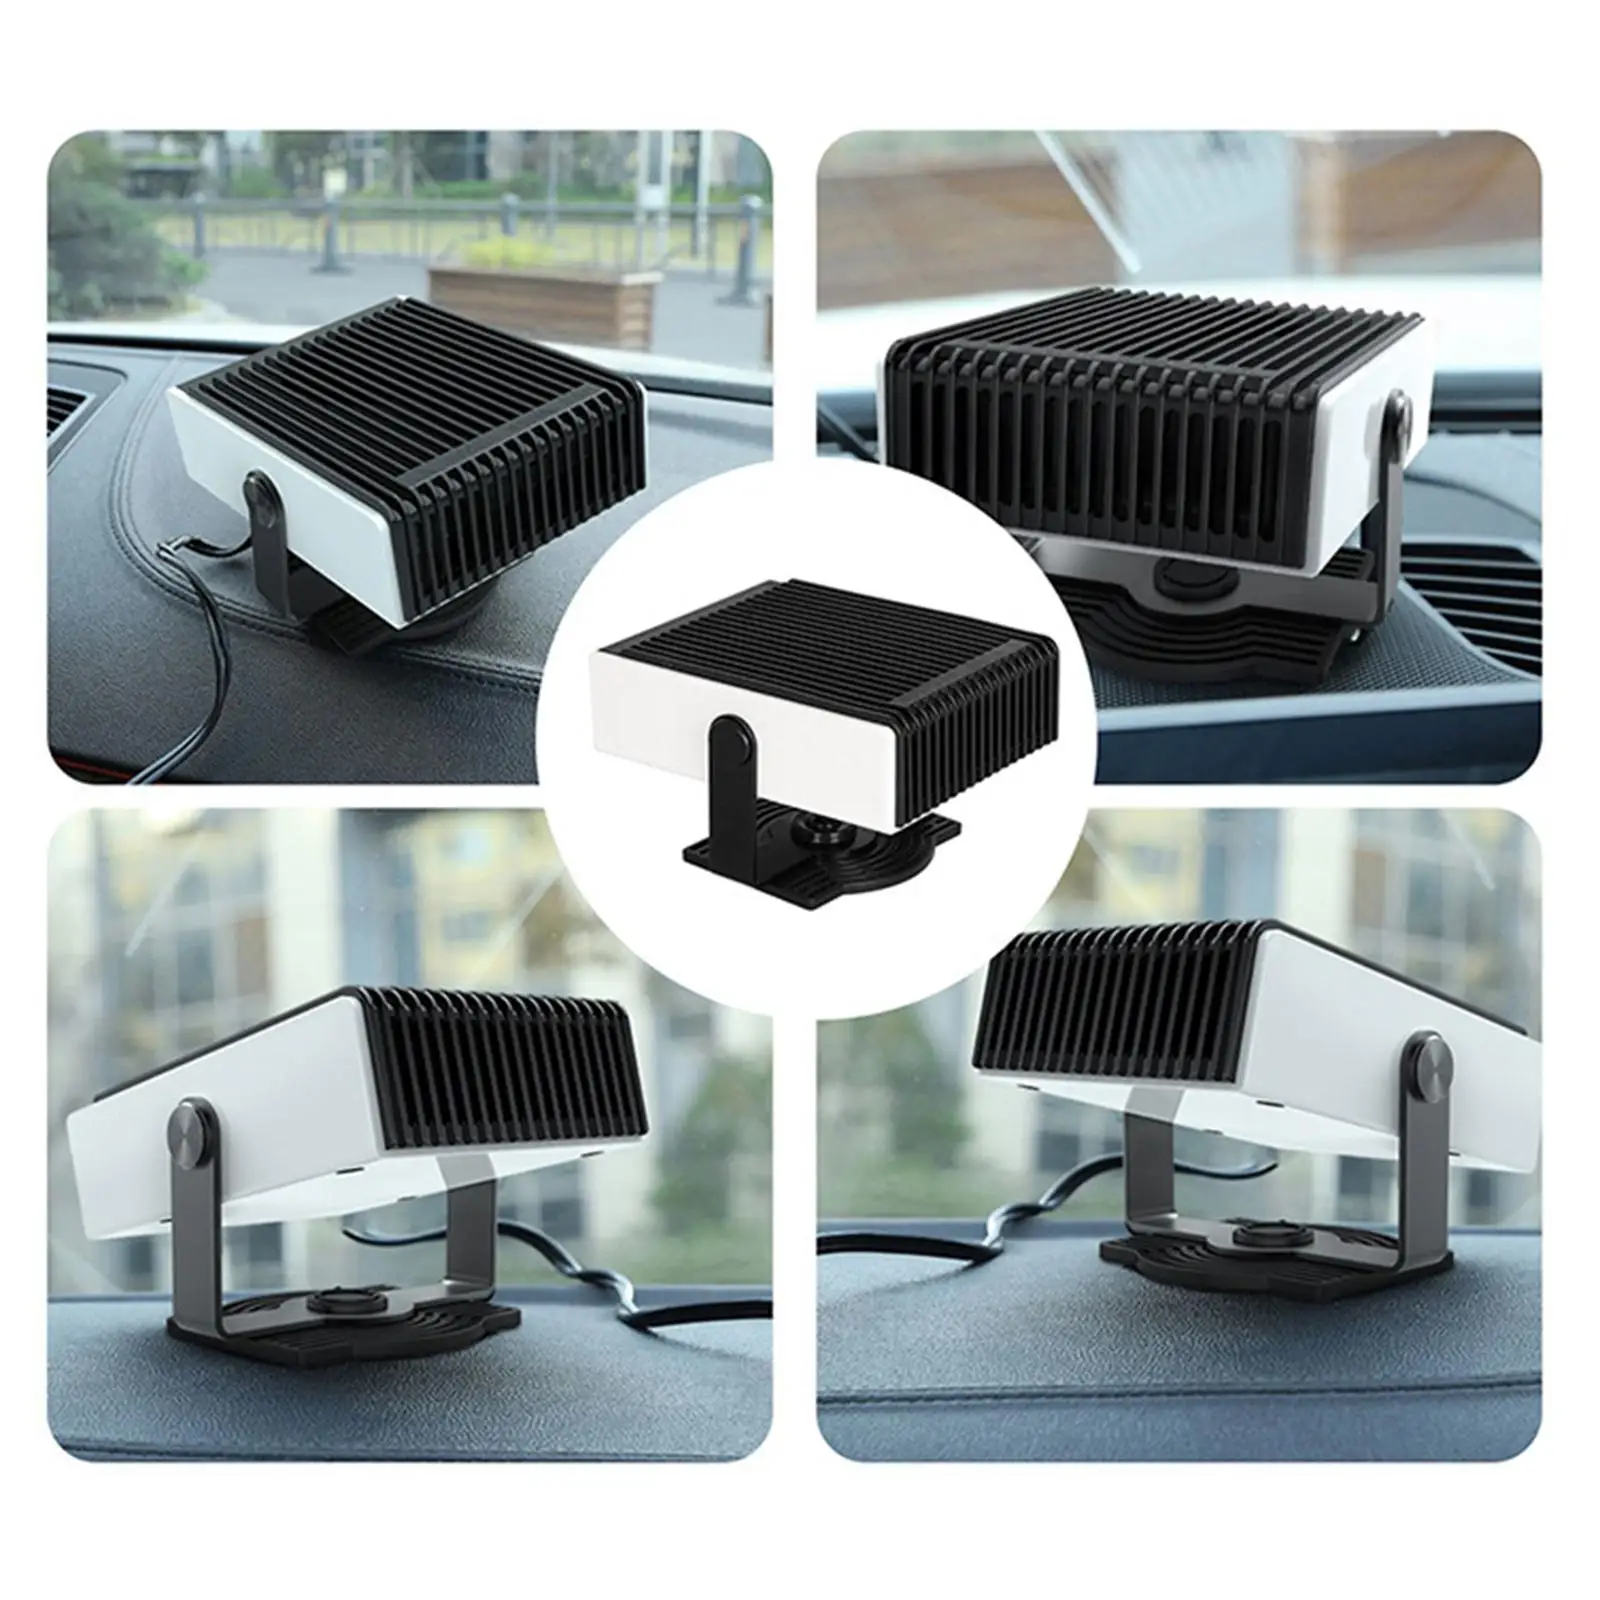 Car Heater 2 in 1 1.5M Cable Windshield Defogging for Summer Clear Driving Sight